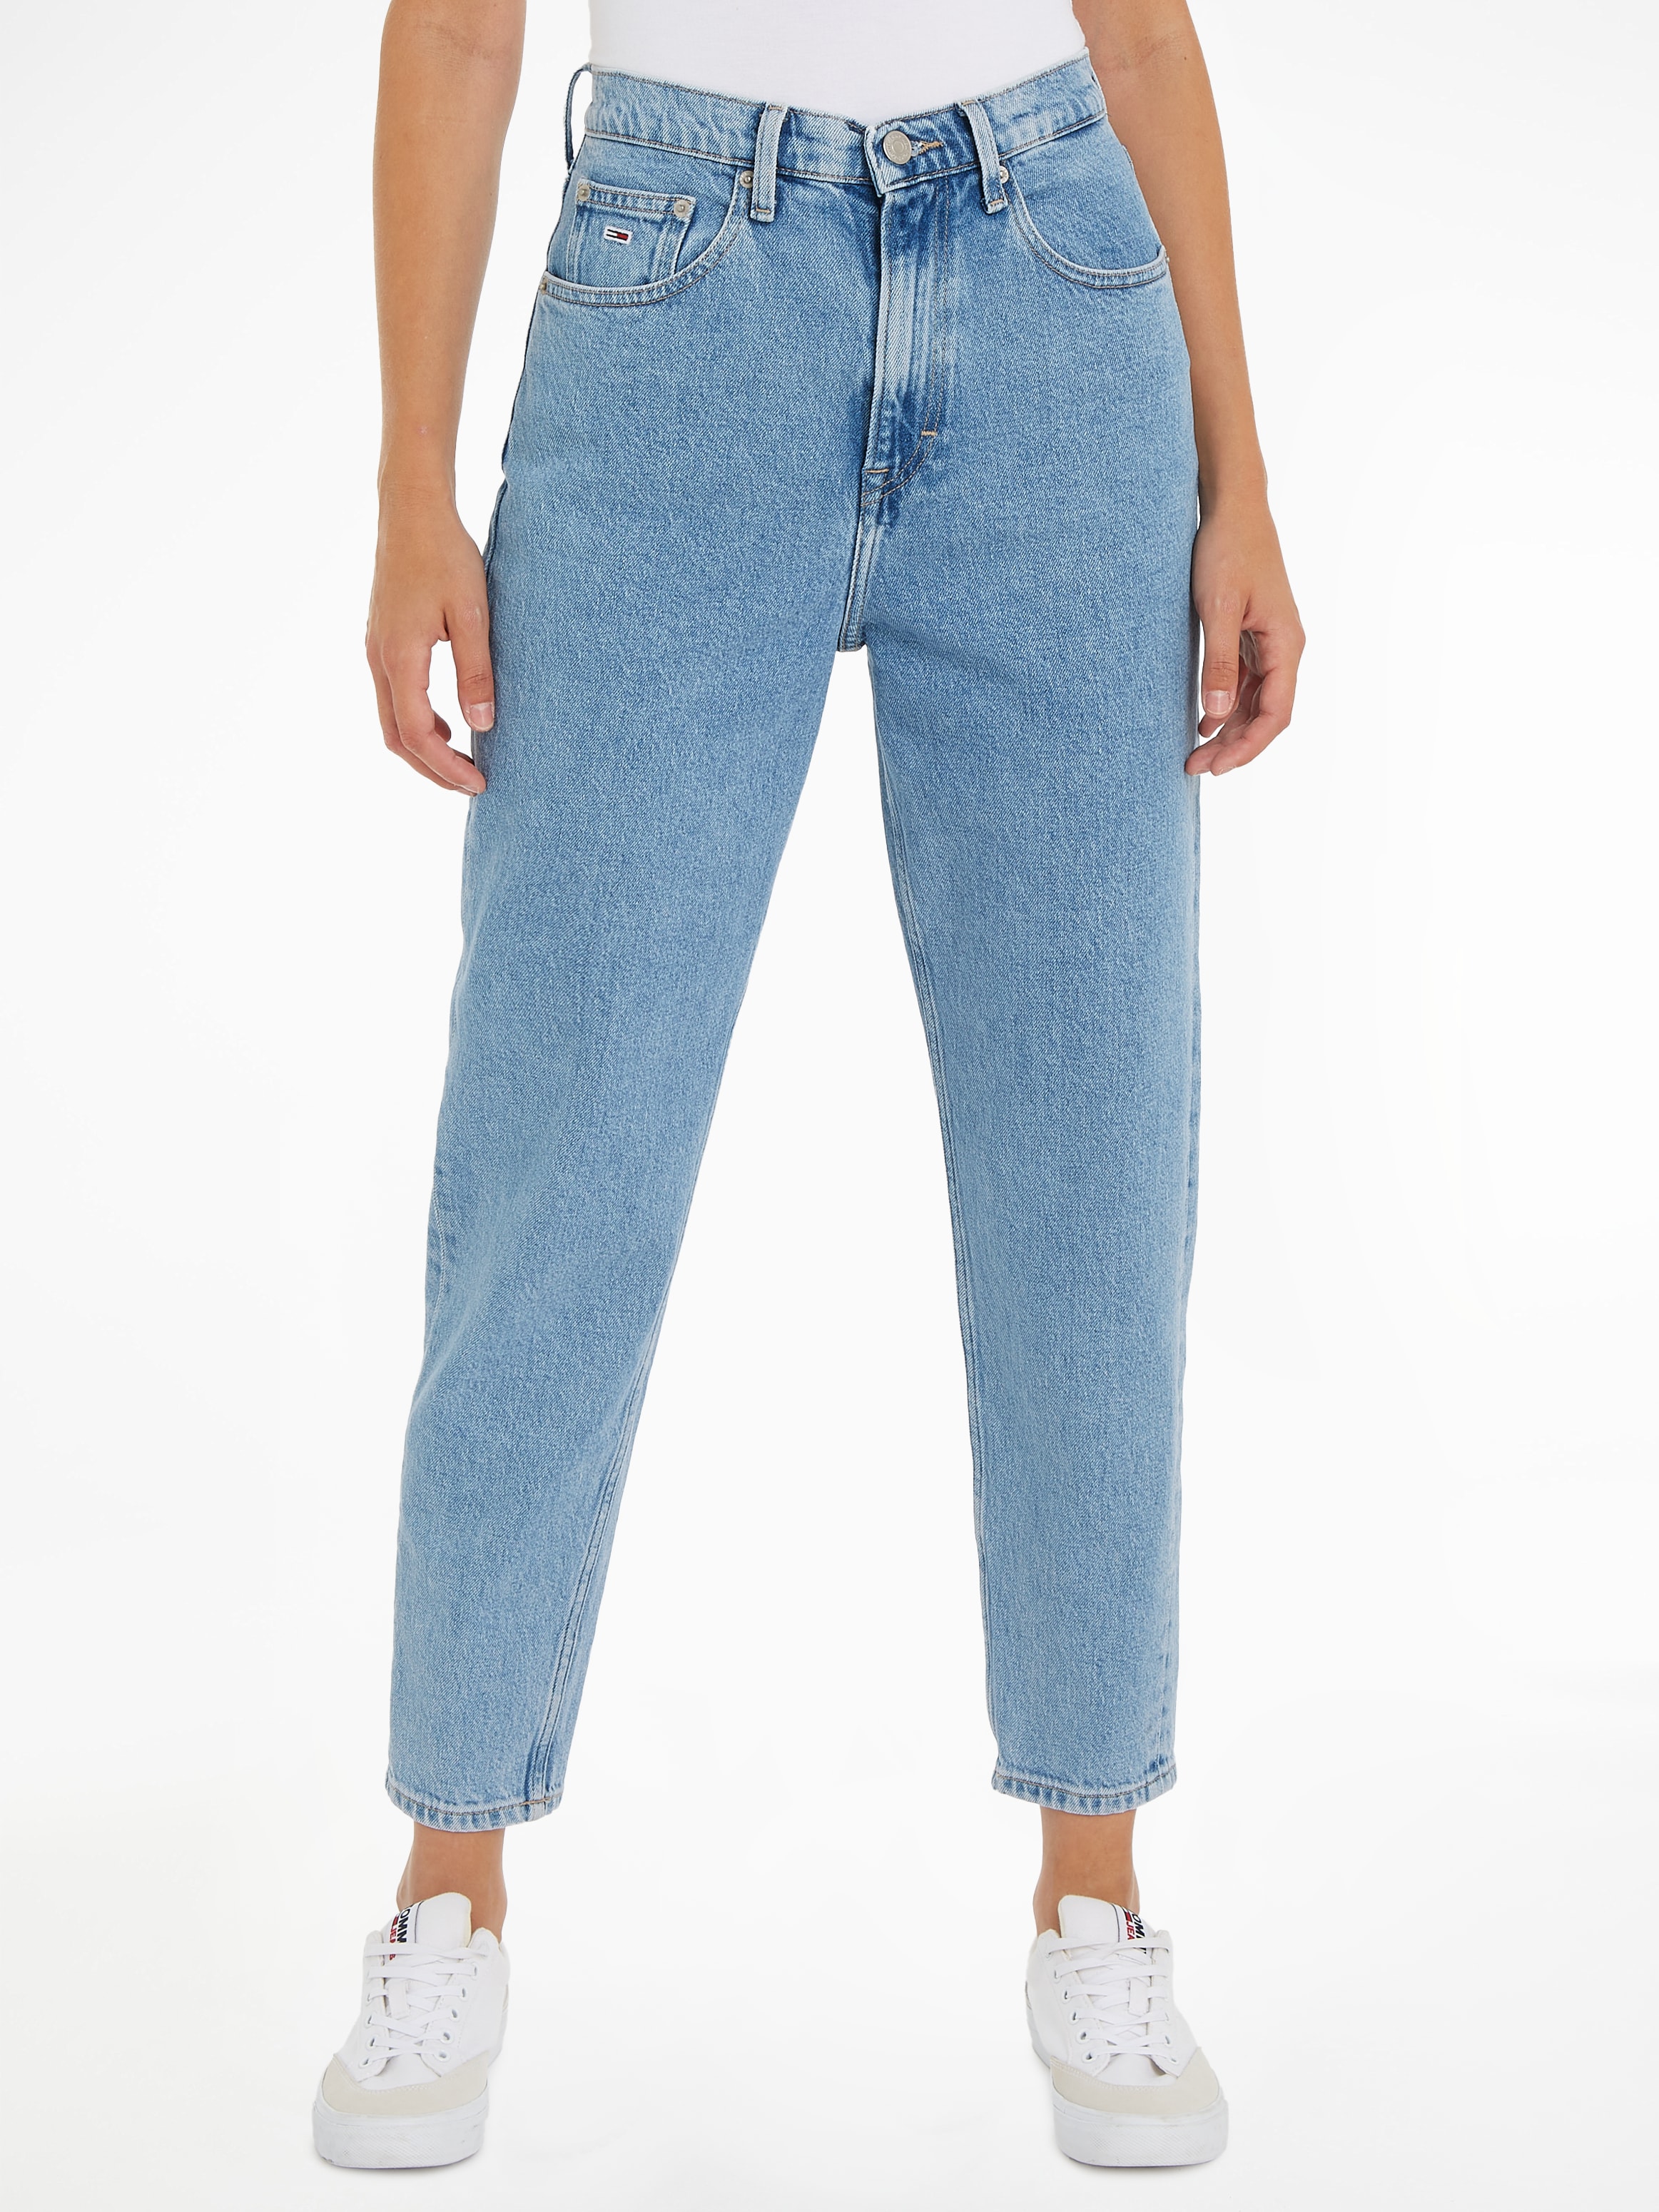 Tommy Jeans Mom-Jeans »MOM Logopatch online UH kaufen JEAN mit DG«, TPR